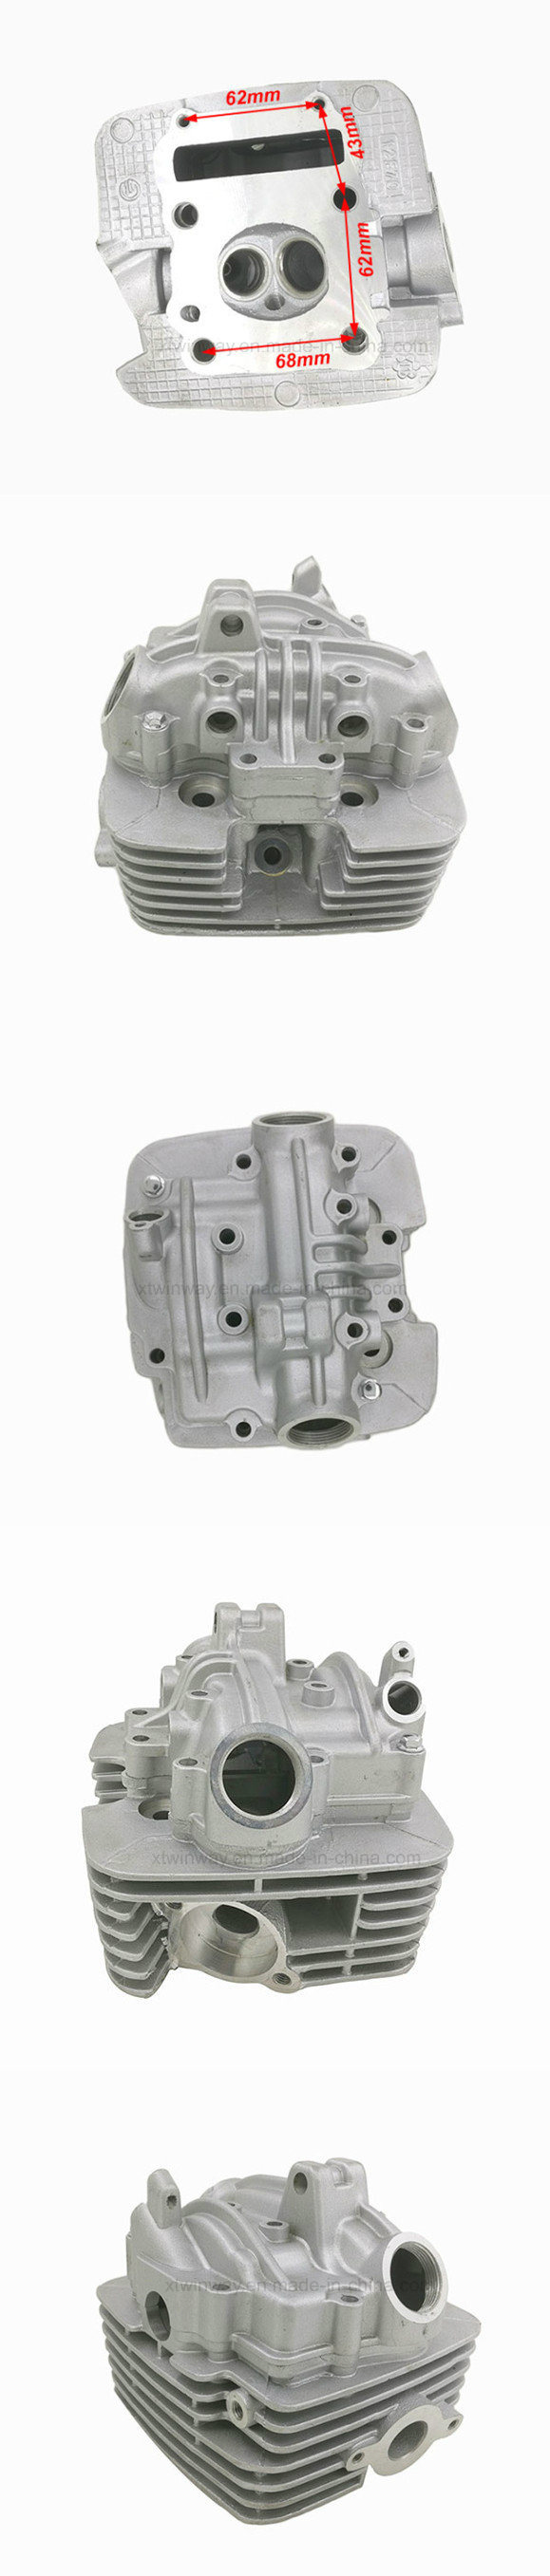 Gn/GS125 Motorcycle Cylinder Head Cover Motorcycle Parts